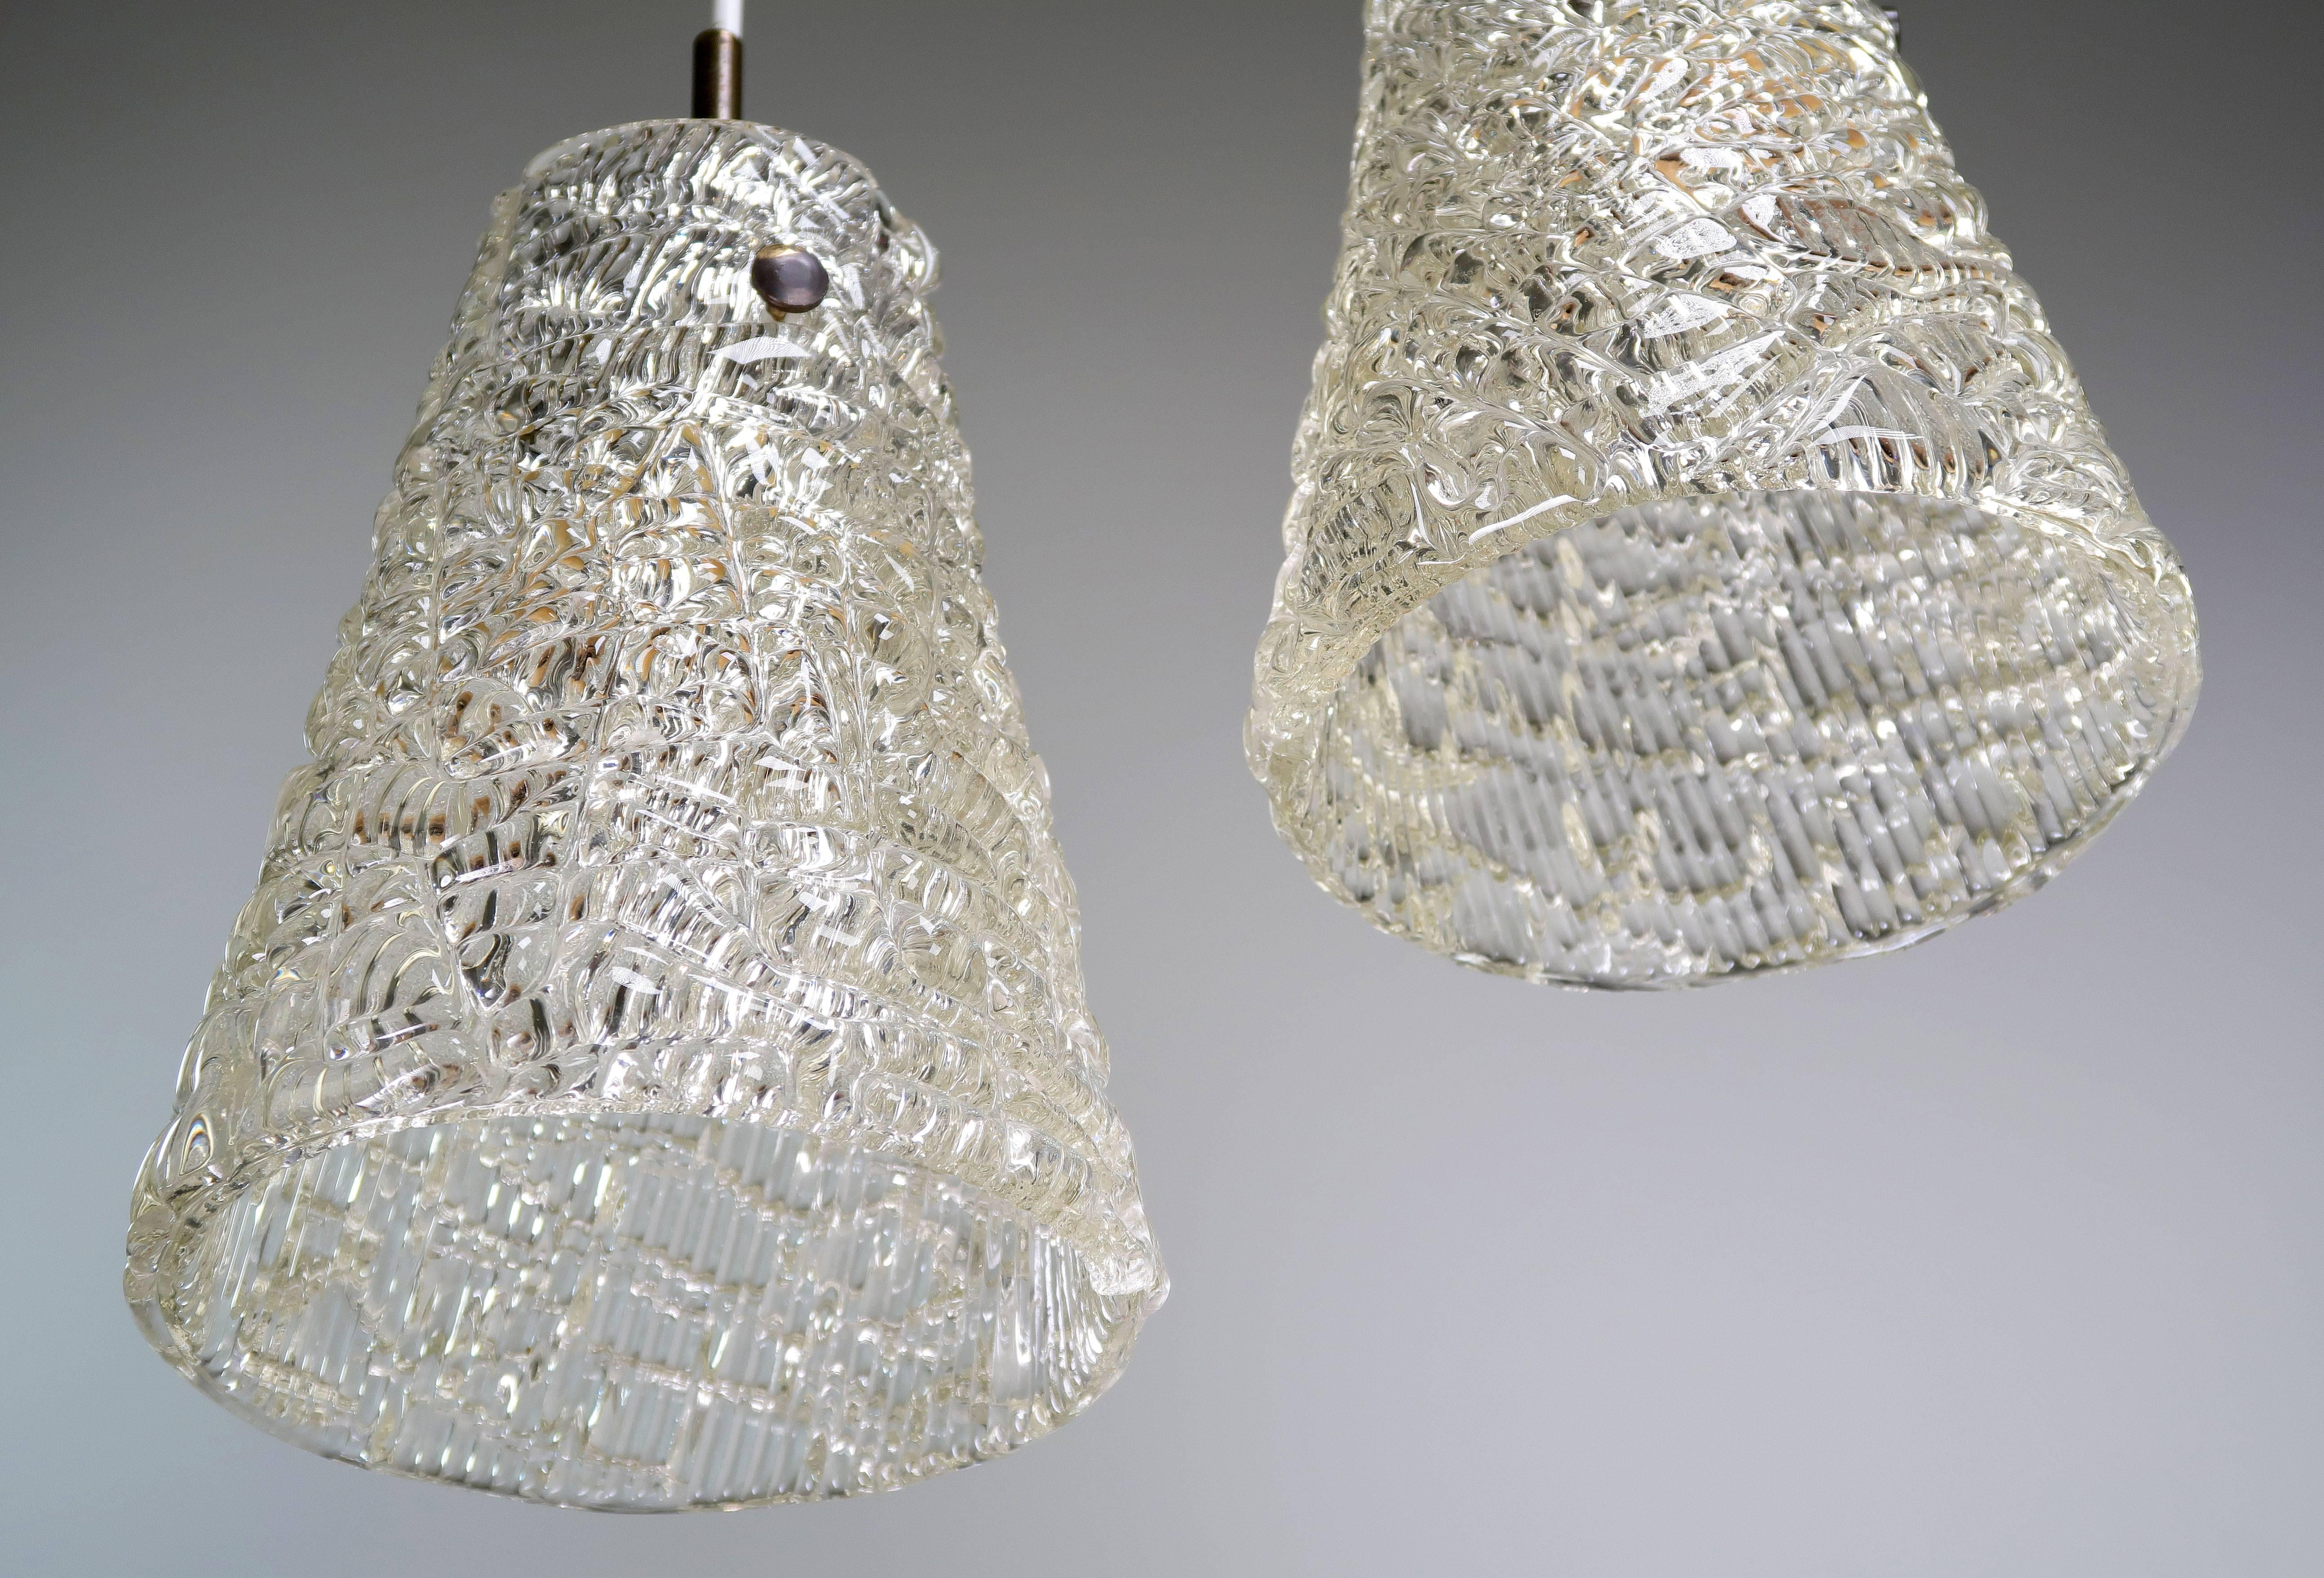 Beautiful and rarely seen pair of Scandinavian Mid Century Modern cone shaped glass pendants by Swedish Orrefors. Handblown clear textured glass with brass hardware. Designed by Carl Fagerlund in the 1960s. E27 bulb. Rewired and in excellent vintage